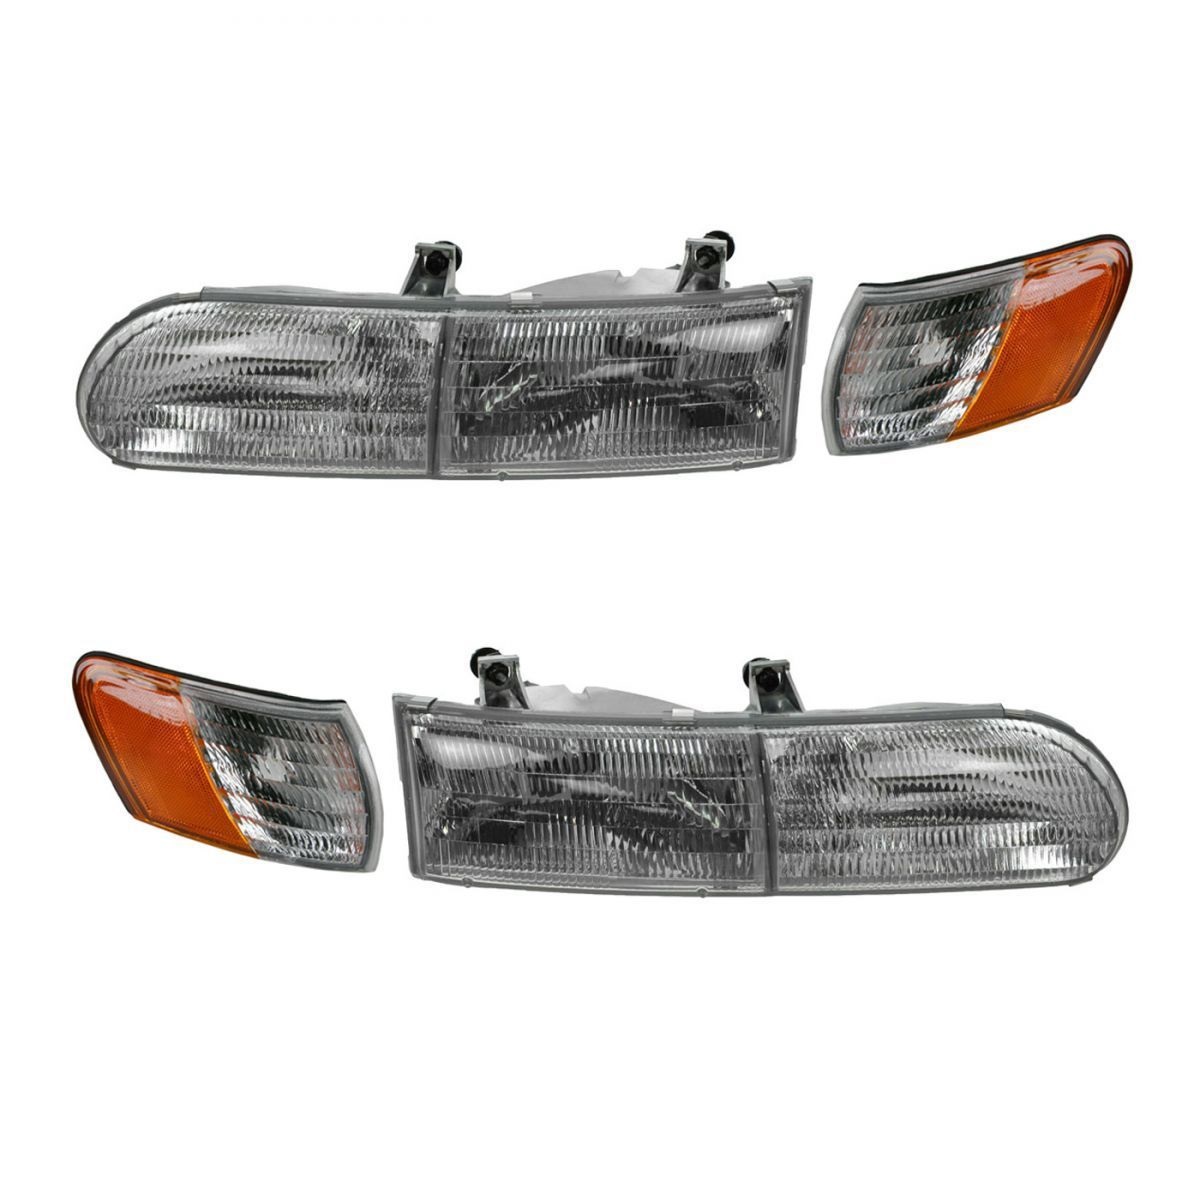 Gulf Stream Crescendo Replacement Headlights and Corner Turn Signal Lamps (4 Piece Set) (Left & Right)